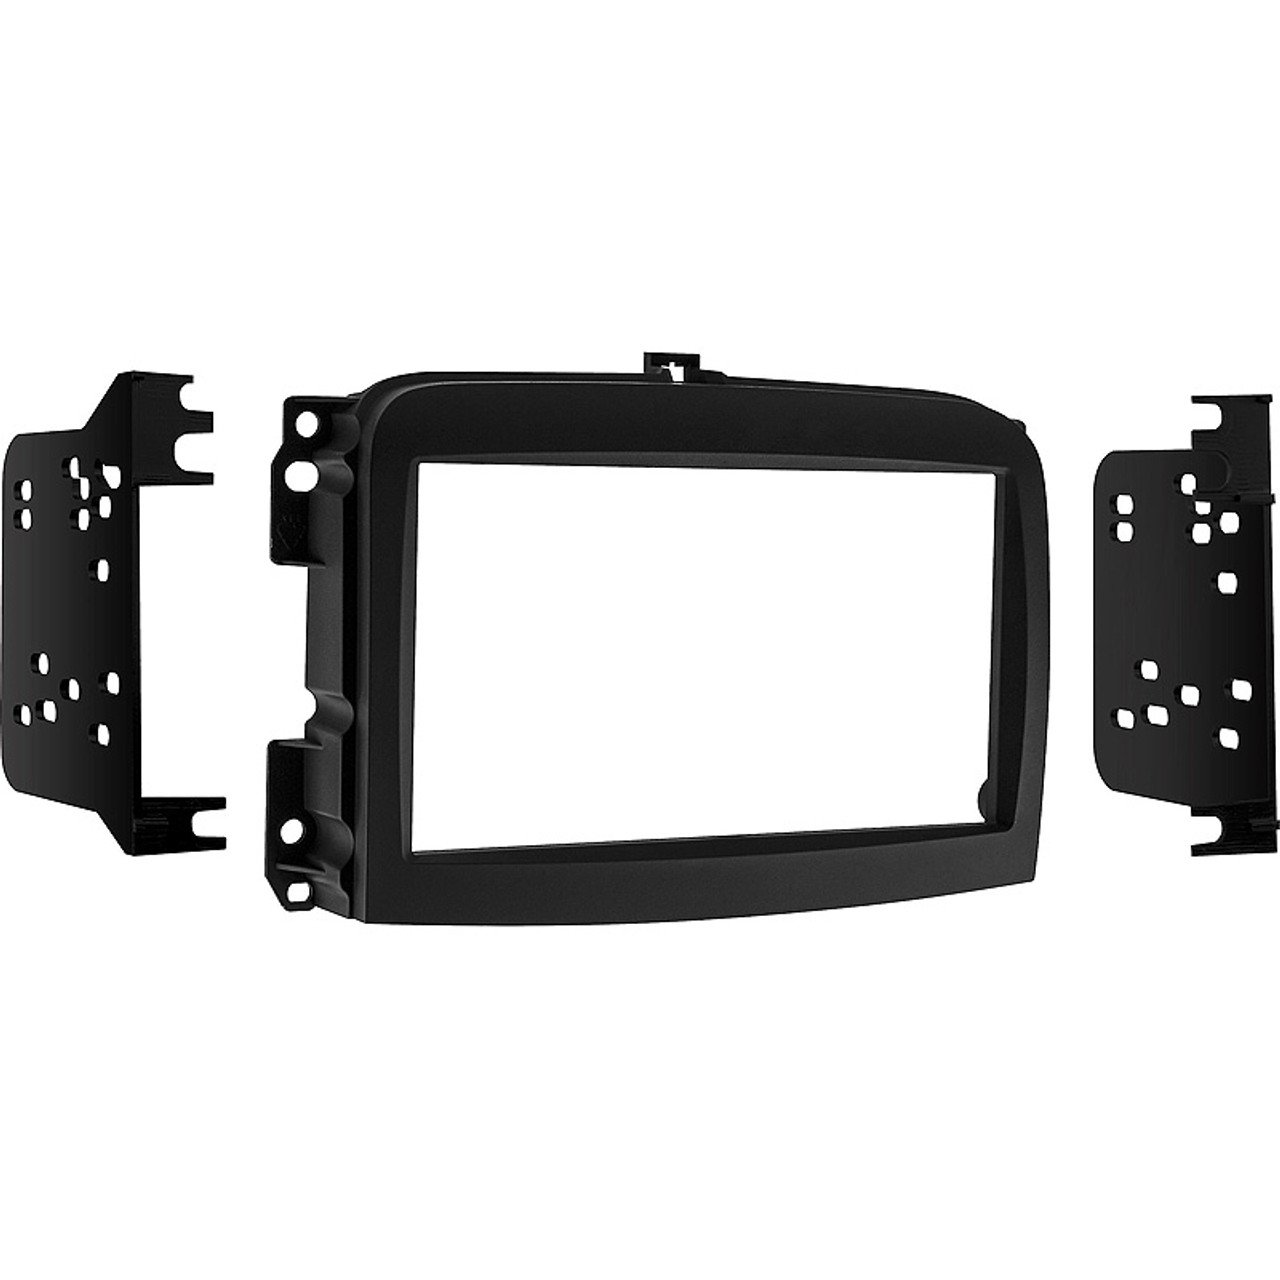 Metra 95-6521B Double DIN Installation Kit for Fiat 500L 2014-Up